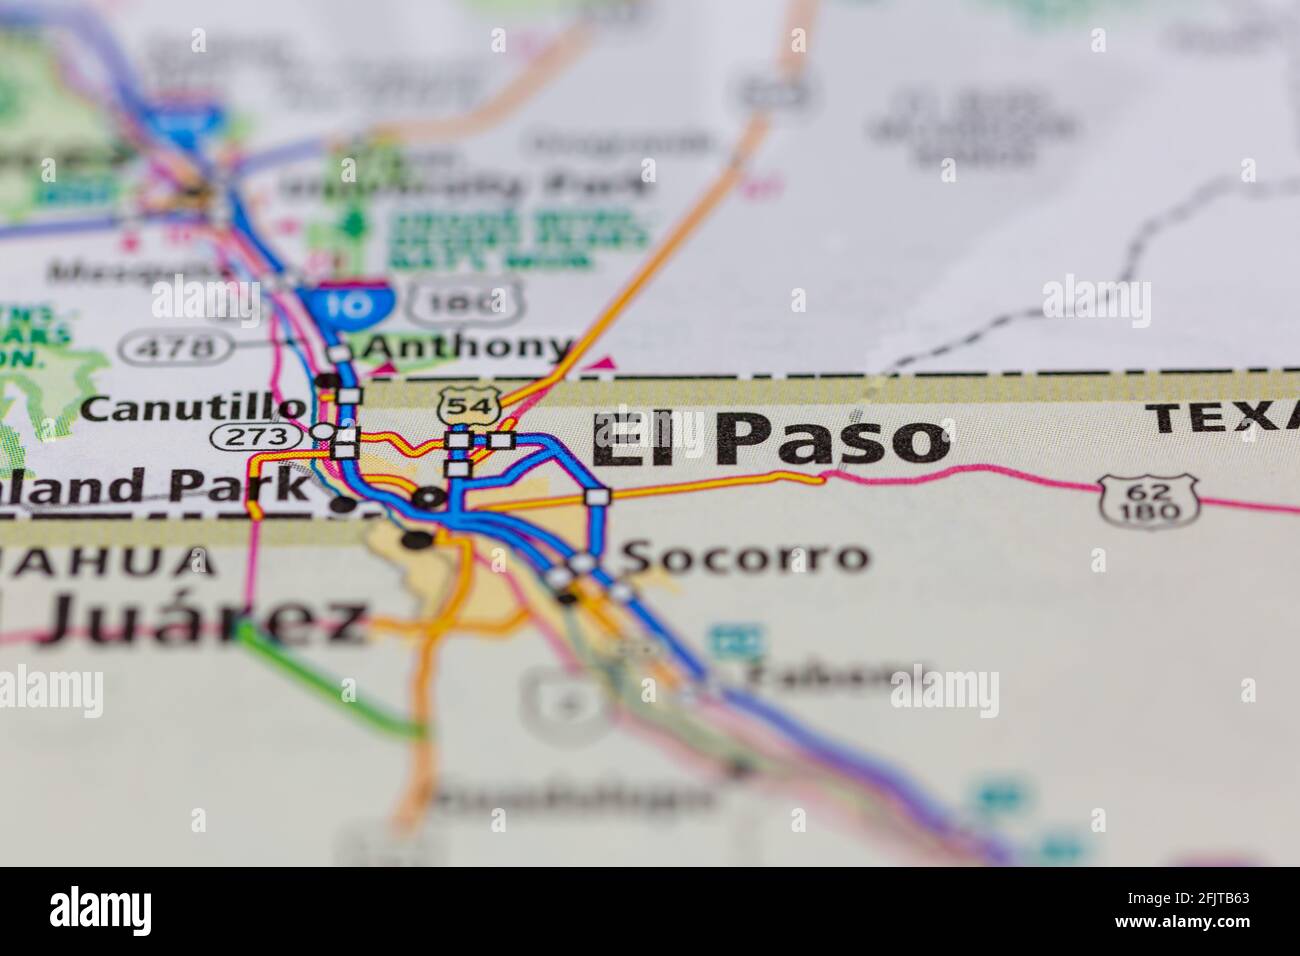 El Paso Texas USA and surrounding areas Shown on a road map or Geography map Stock Photo